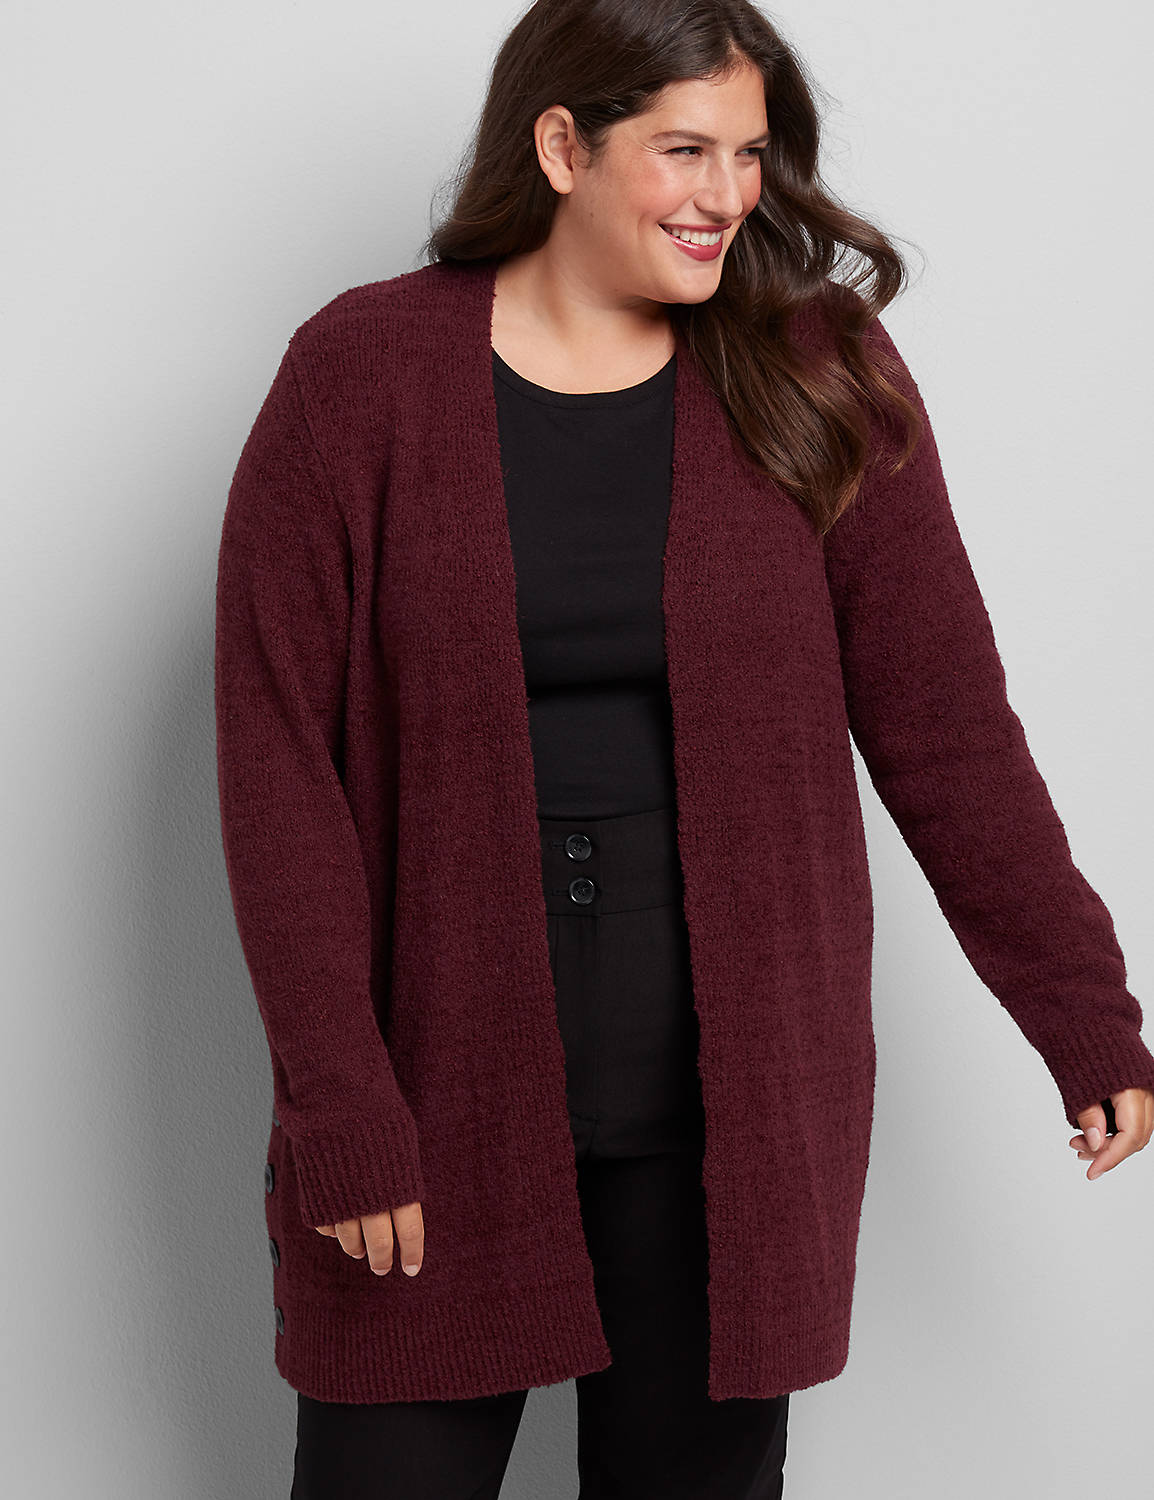 Long Sleeve Open Front Side Button Vent Cardigan :PANTONE Winetasting:10/12 Product Image 1